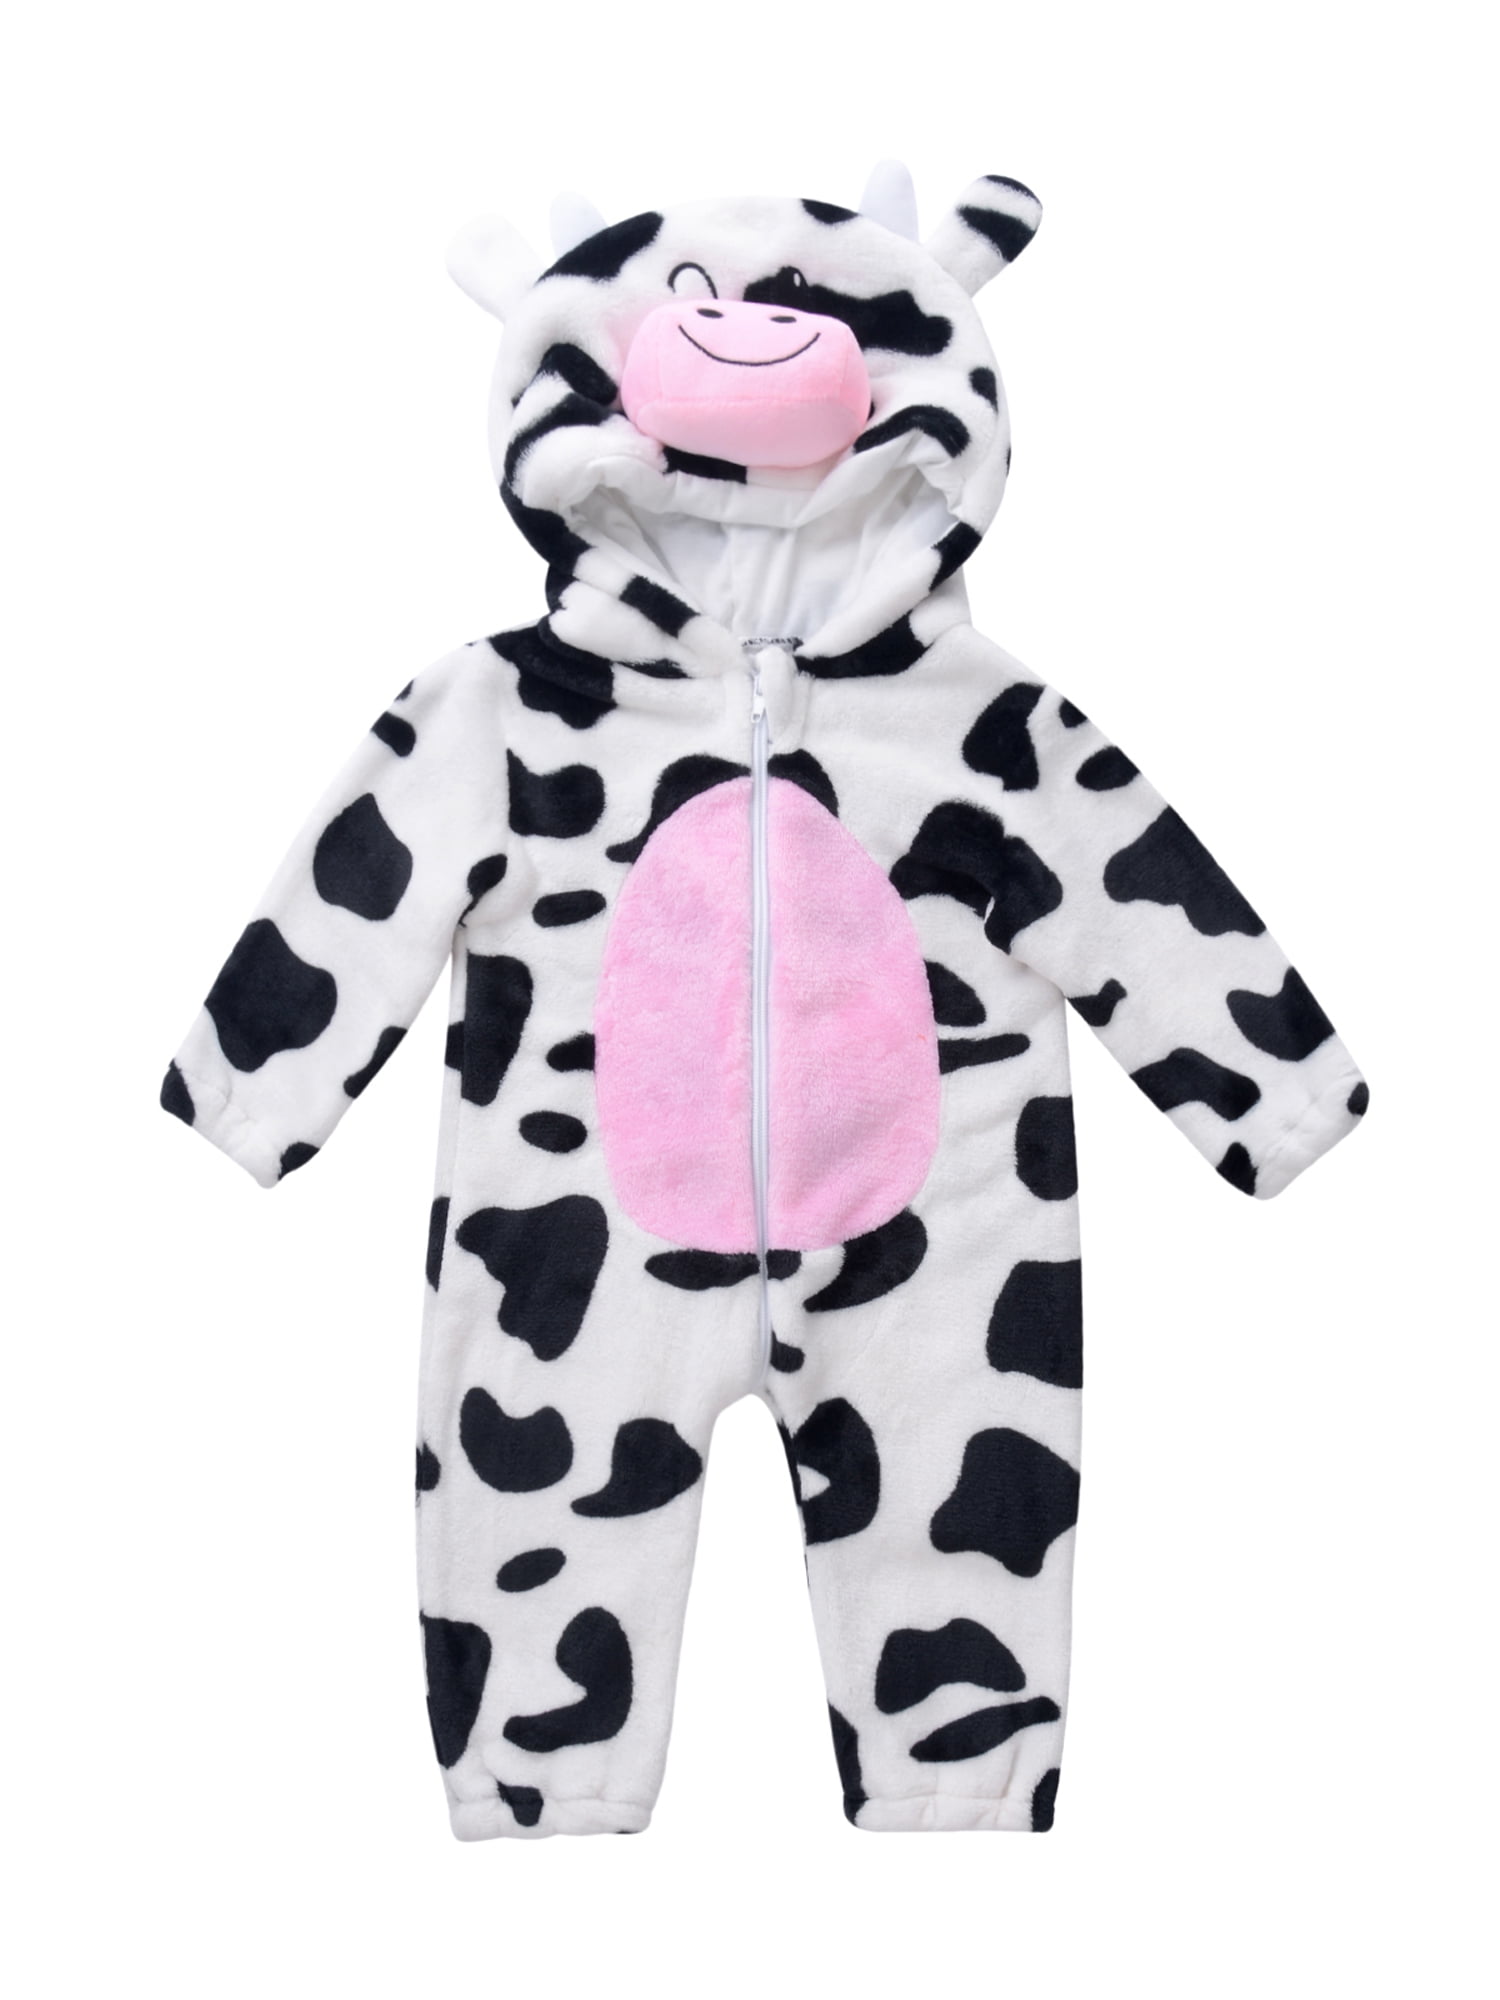 Princess Paradise Kelly the Cow Zoo Animals Infant Baby Halloween Costume 4031 